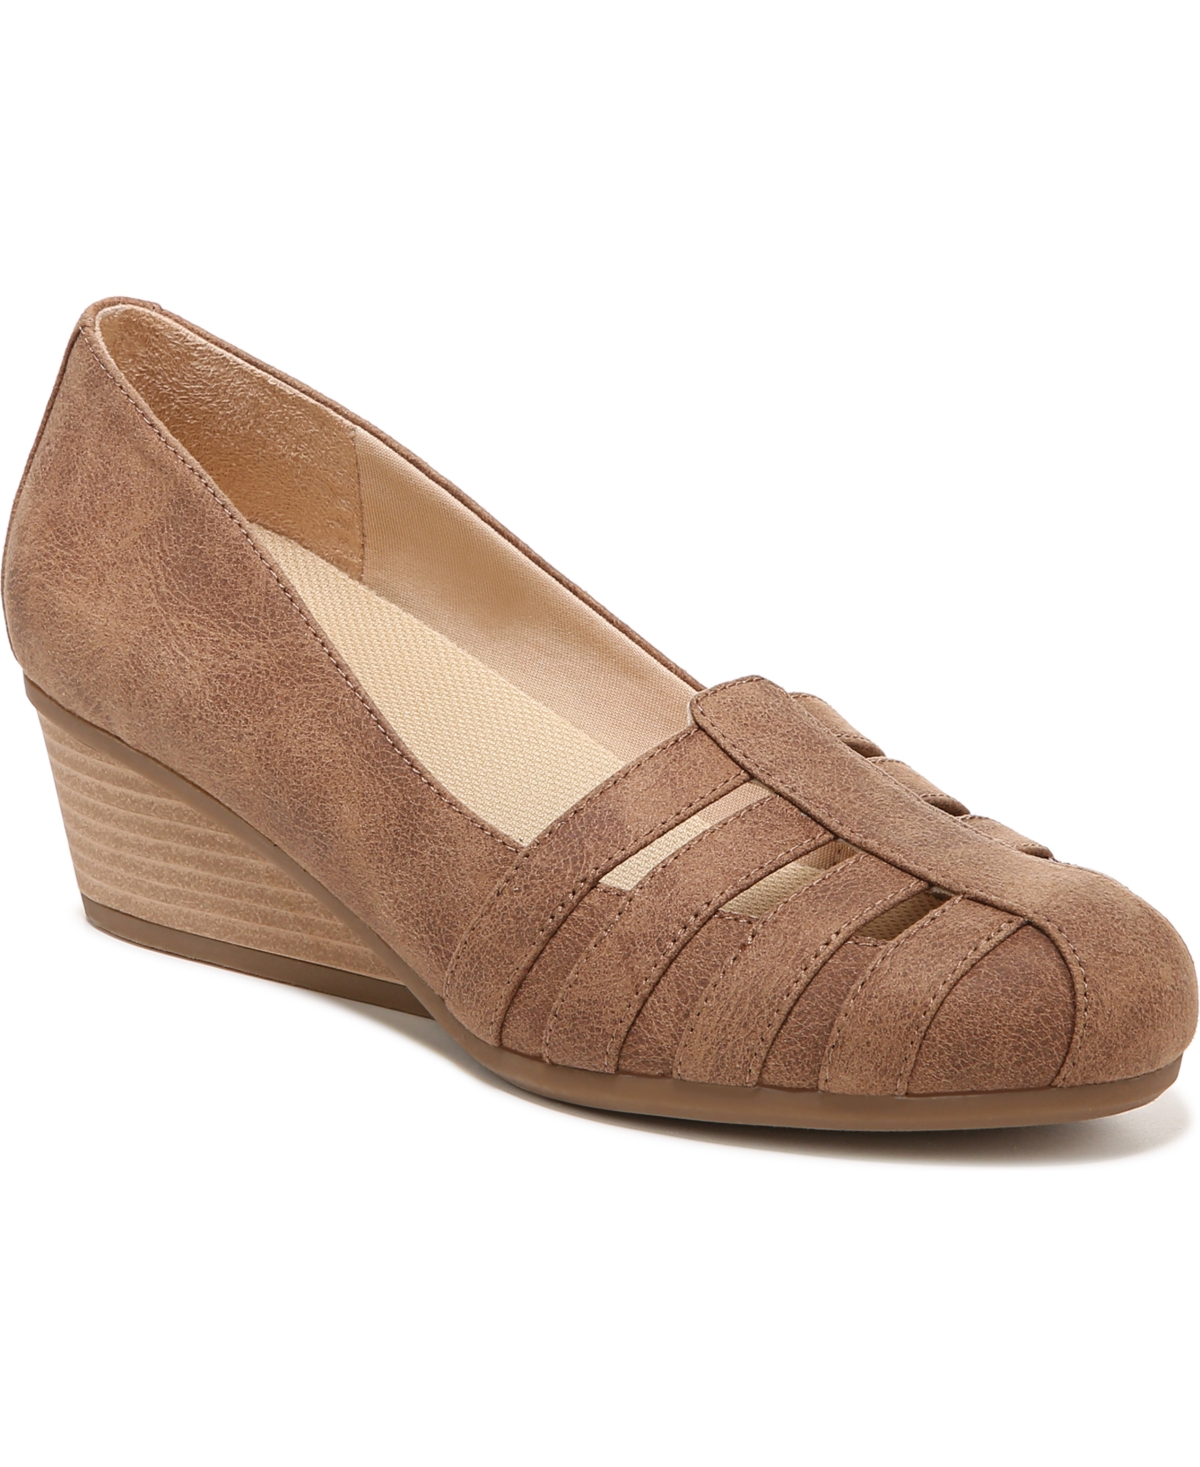 Dr. Scholl's Women's Be Free Wedge Pumps In Sand Fabric